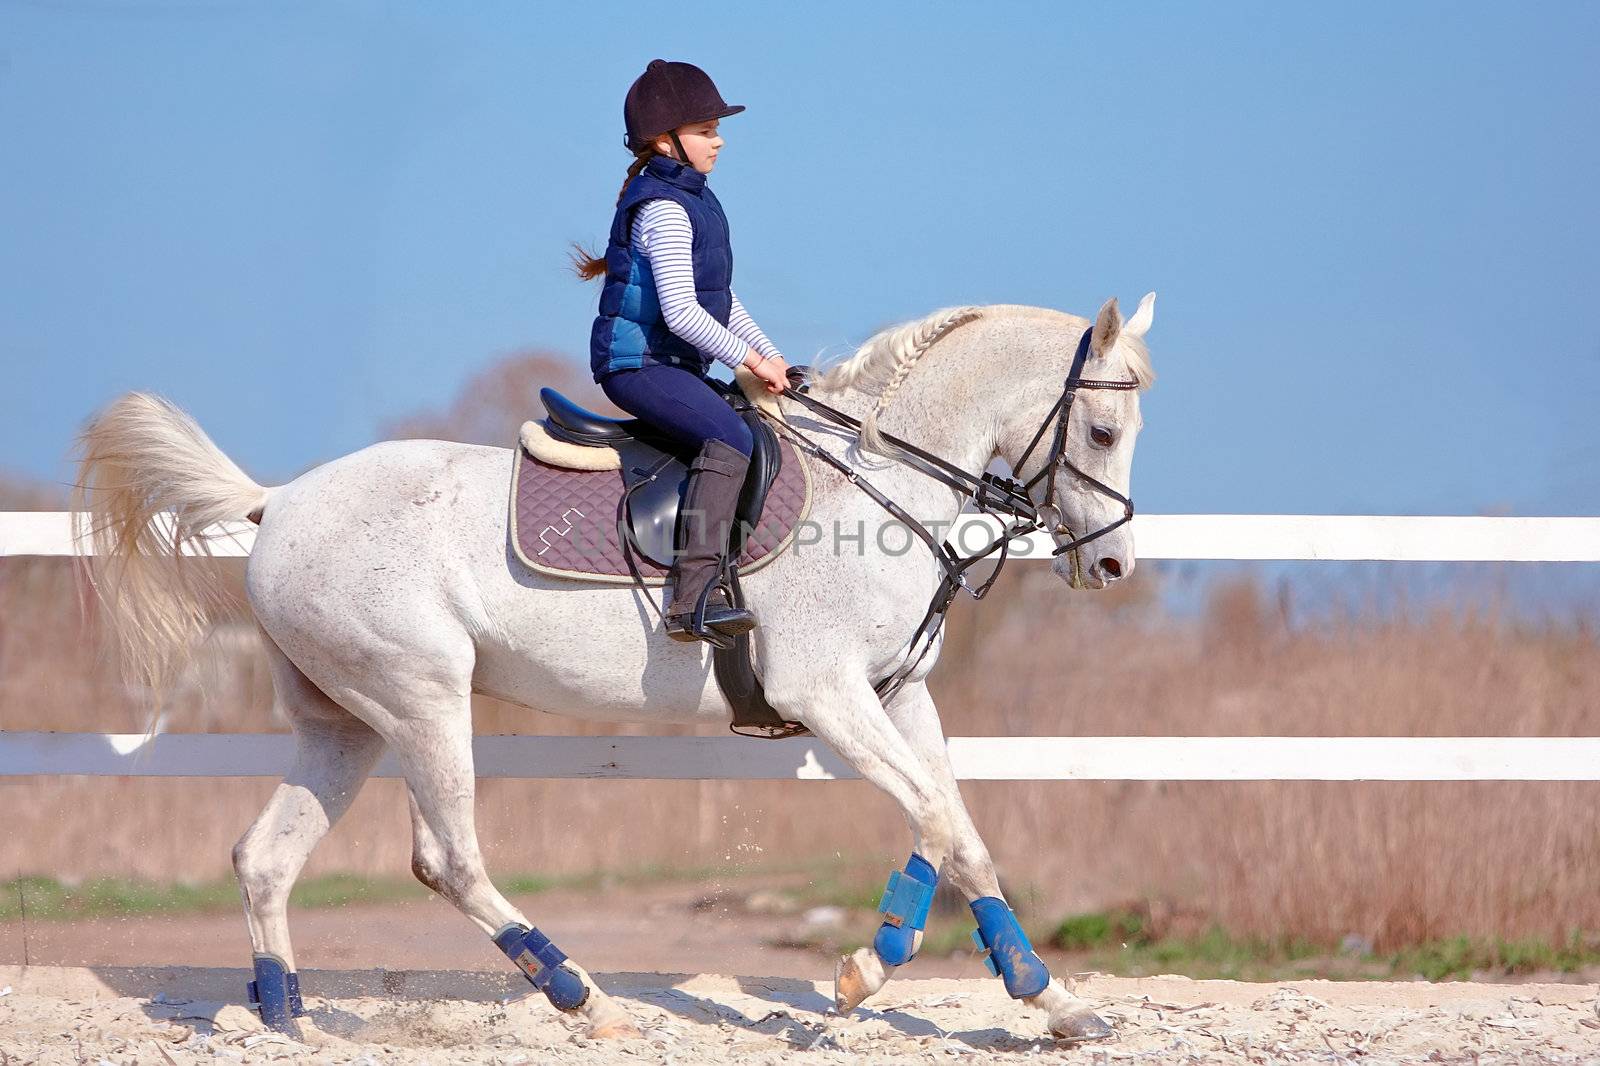 The horsewoman on a white Arab horse